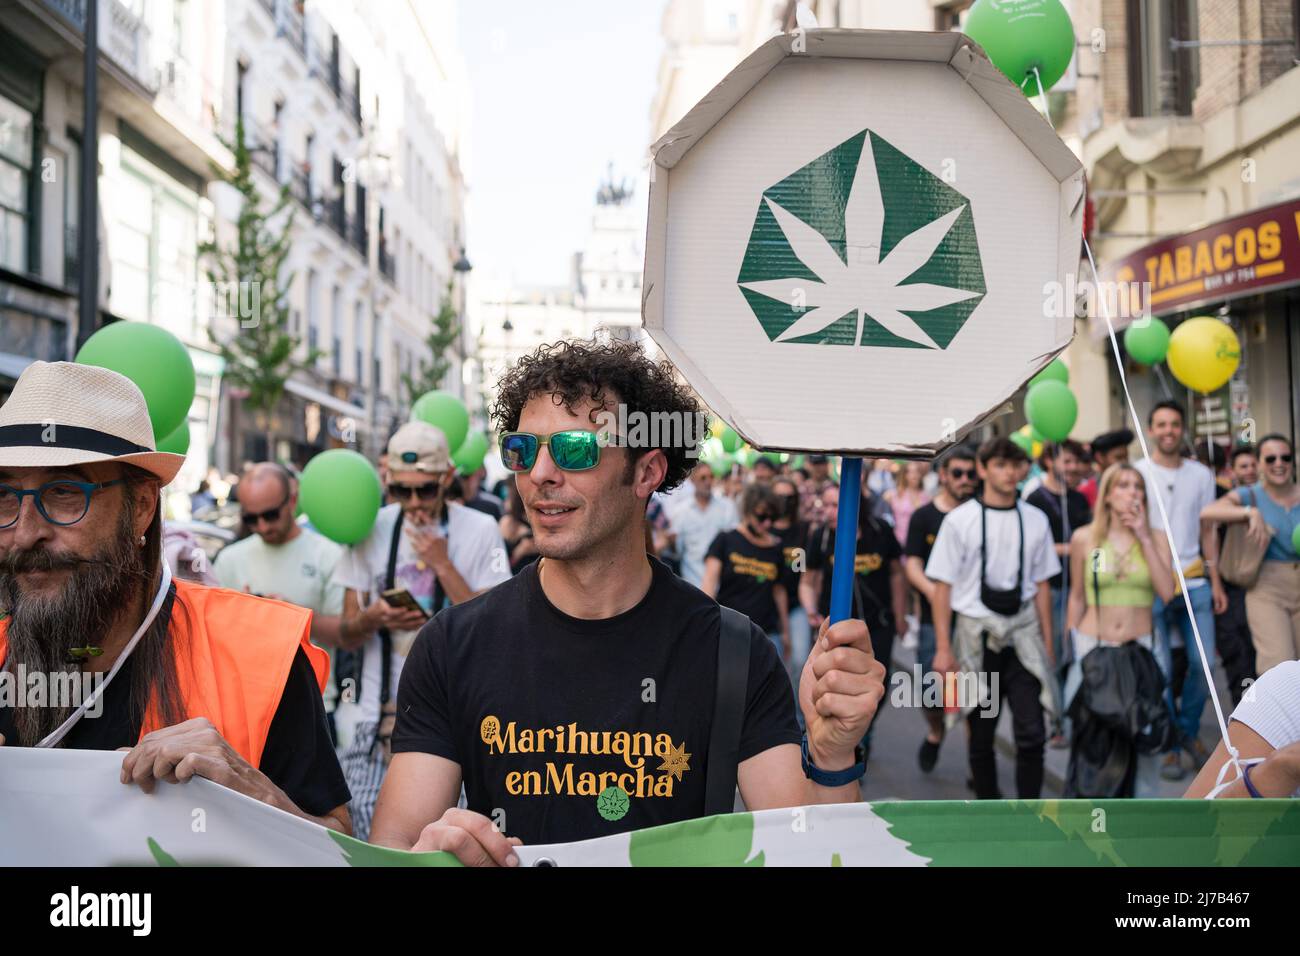 A pro-cannabis protester holds a sign with a marijuana symbol during a demonstration in the center of Madrid. Thousands of pro-cannabis activists took part in a demonstration in La Gran Via in Madrid, Spain, in favor of legalizing the medicinal and recreational use of marijuana. (Photo by Diego Radames / SOPA Images/Sipa USA) Stock Photo